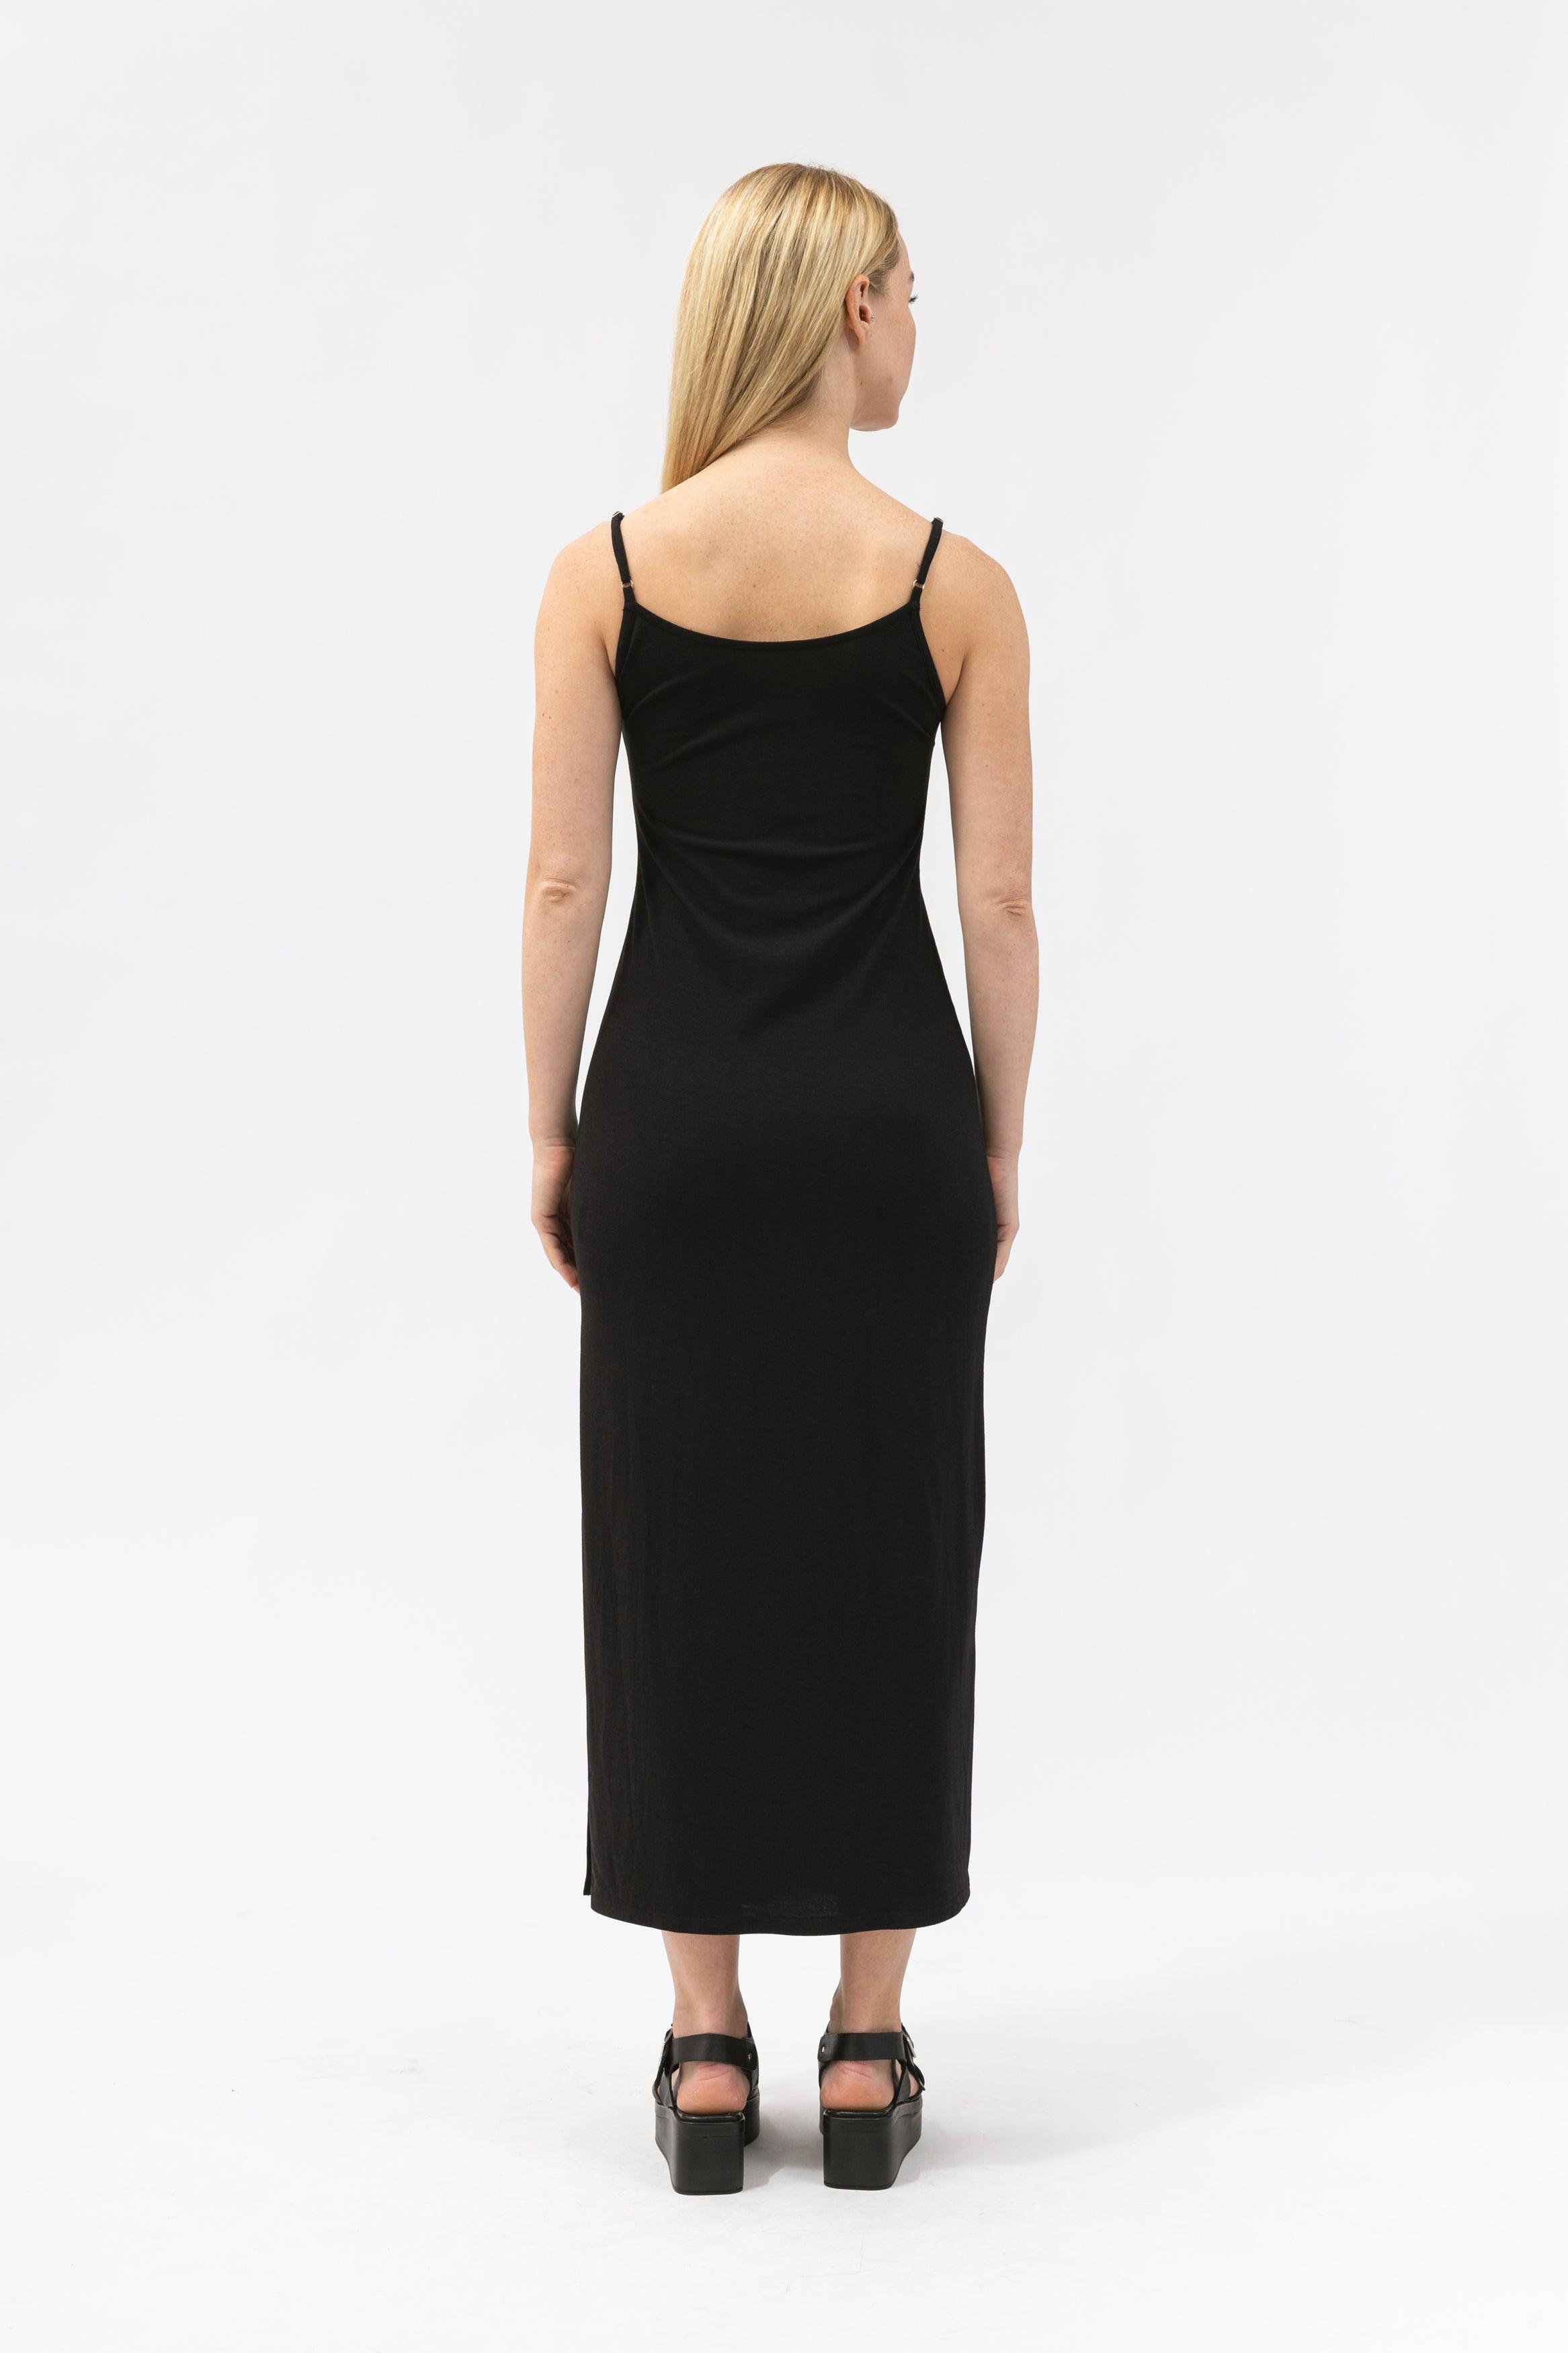 Side Slit Fitted Cami Dress - NOT LABELED